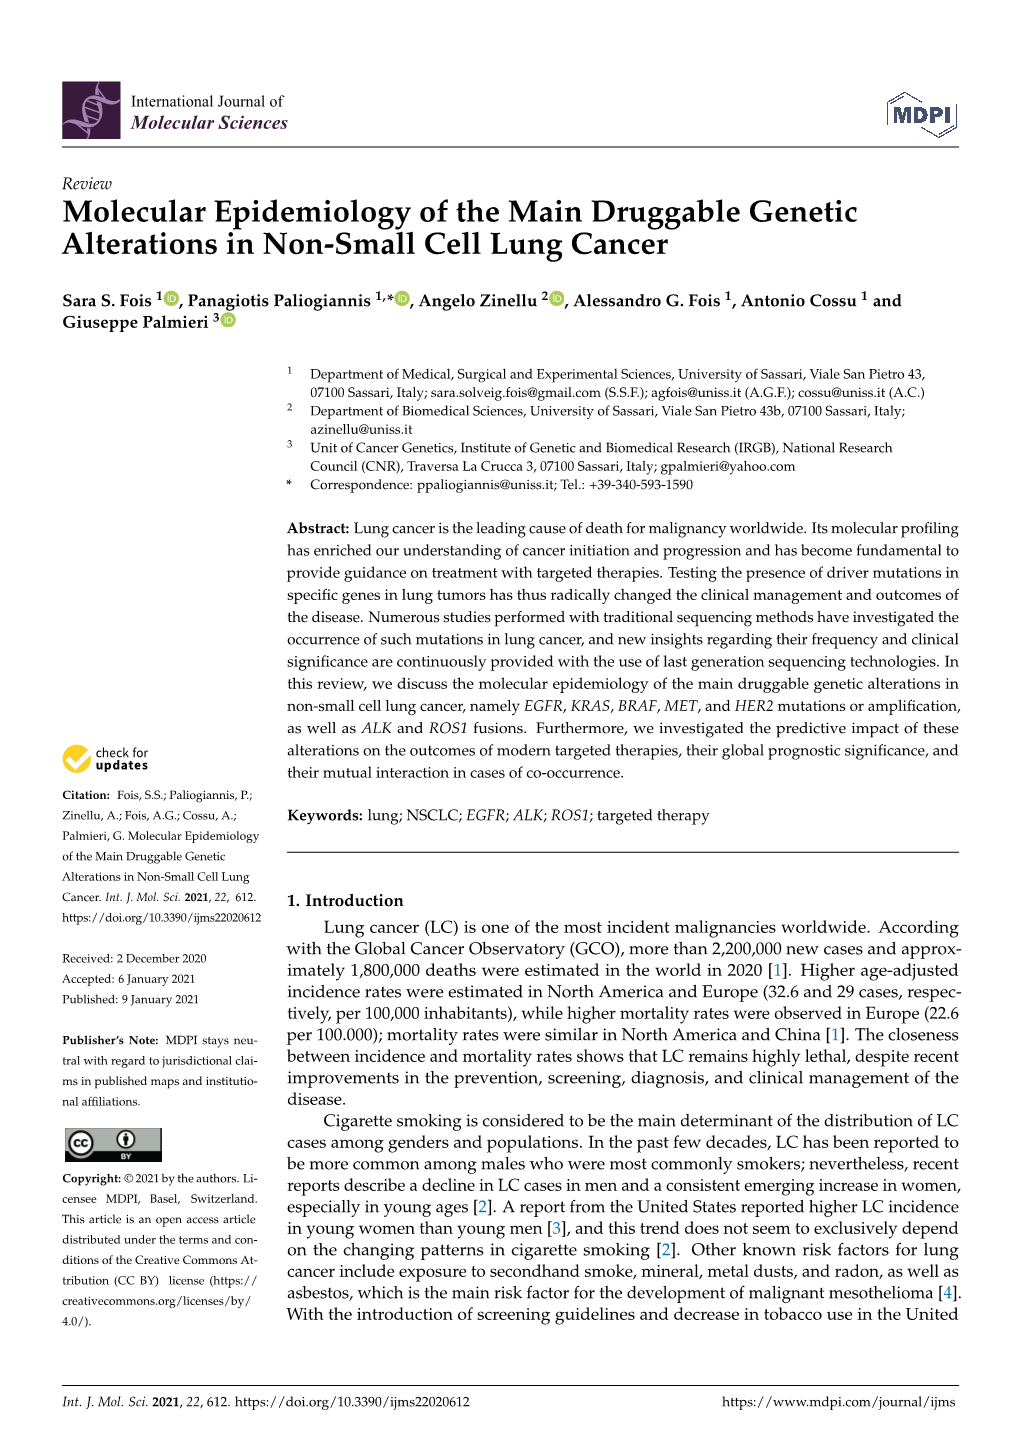 Molecular Epidemiology of the Main Druggable Genetic Alterations in Non-Small Cell Lung Cancer